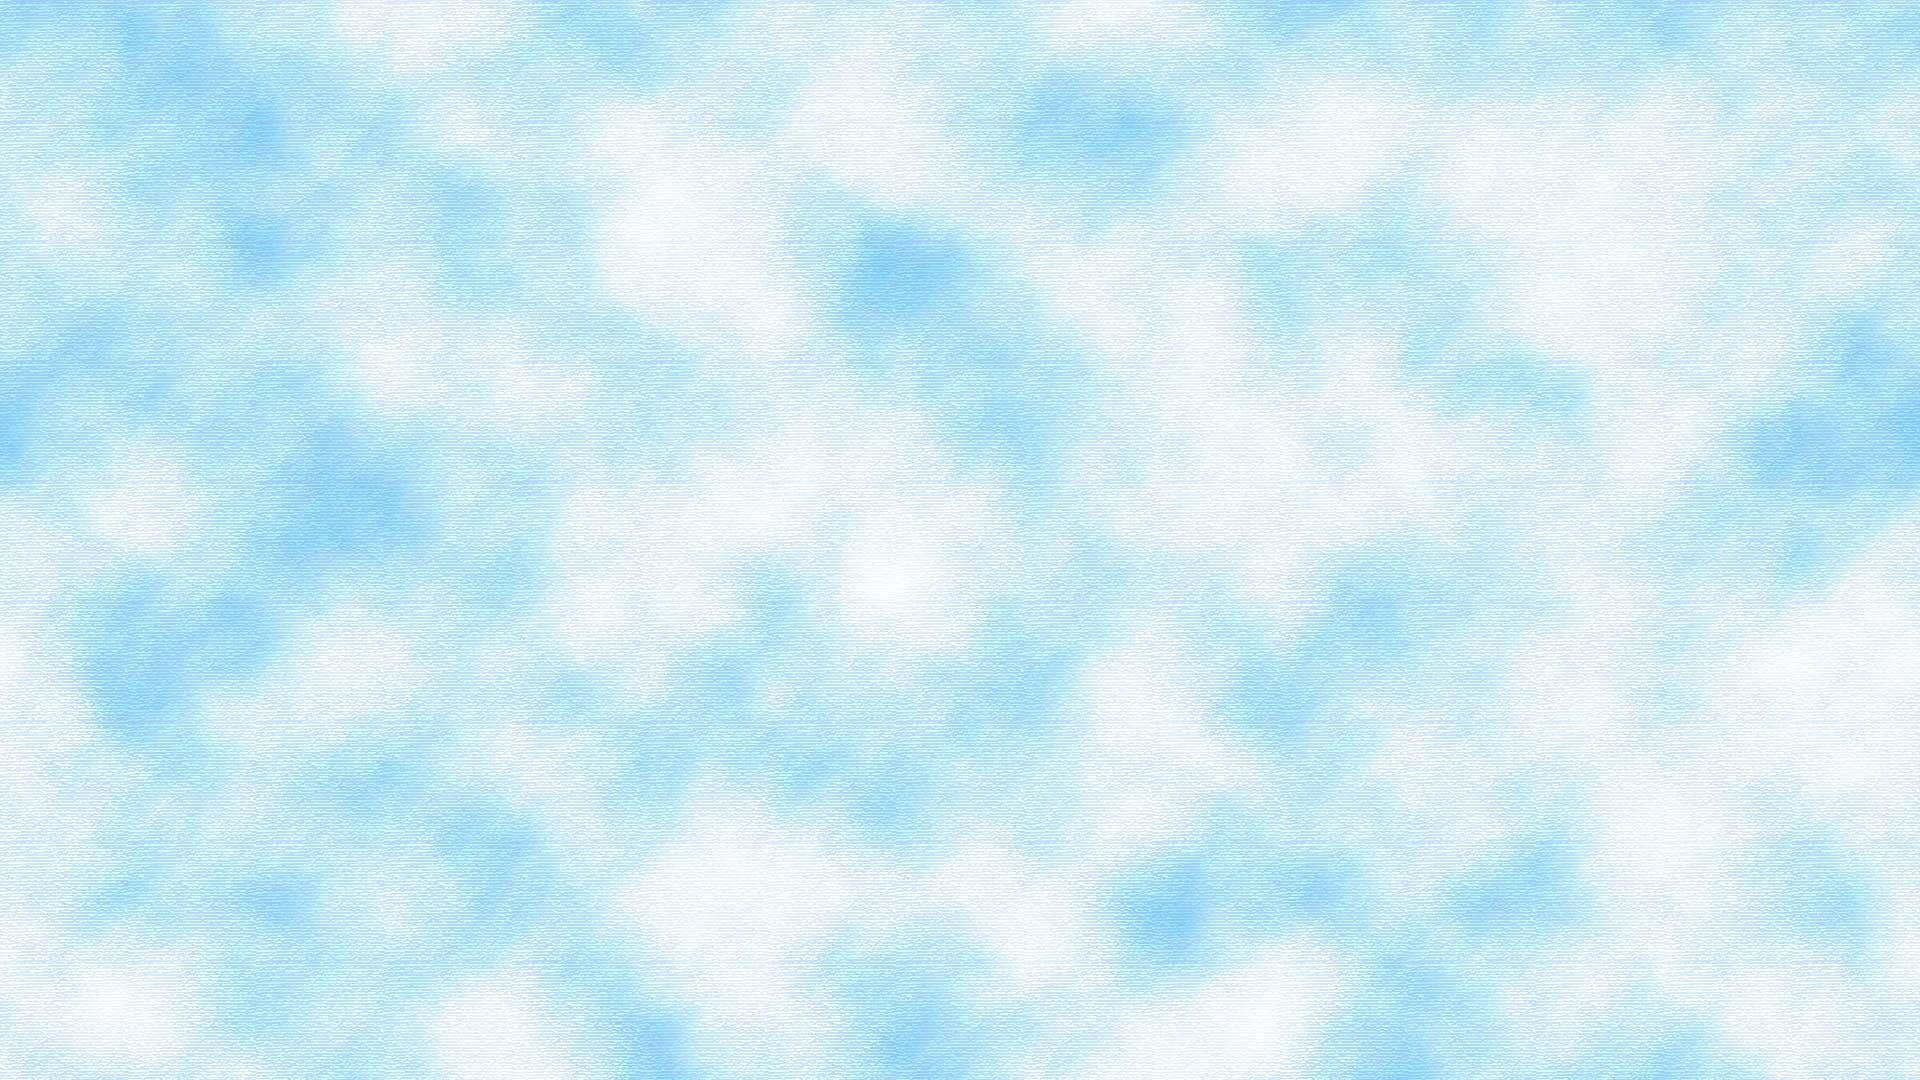 Free Download Clouds Blue Pattern Background Tumblr throughout